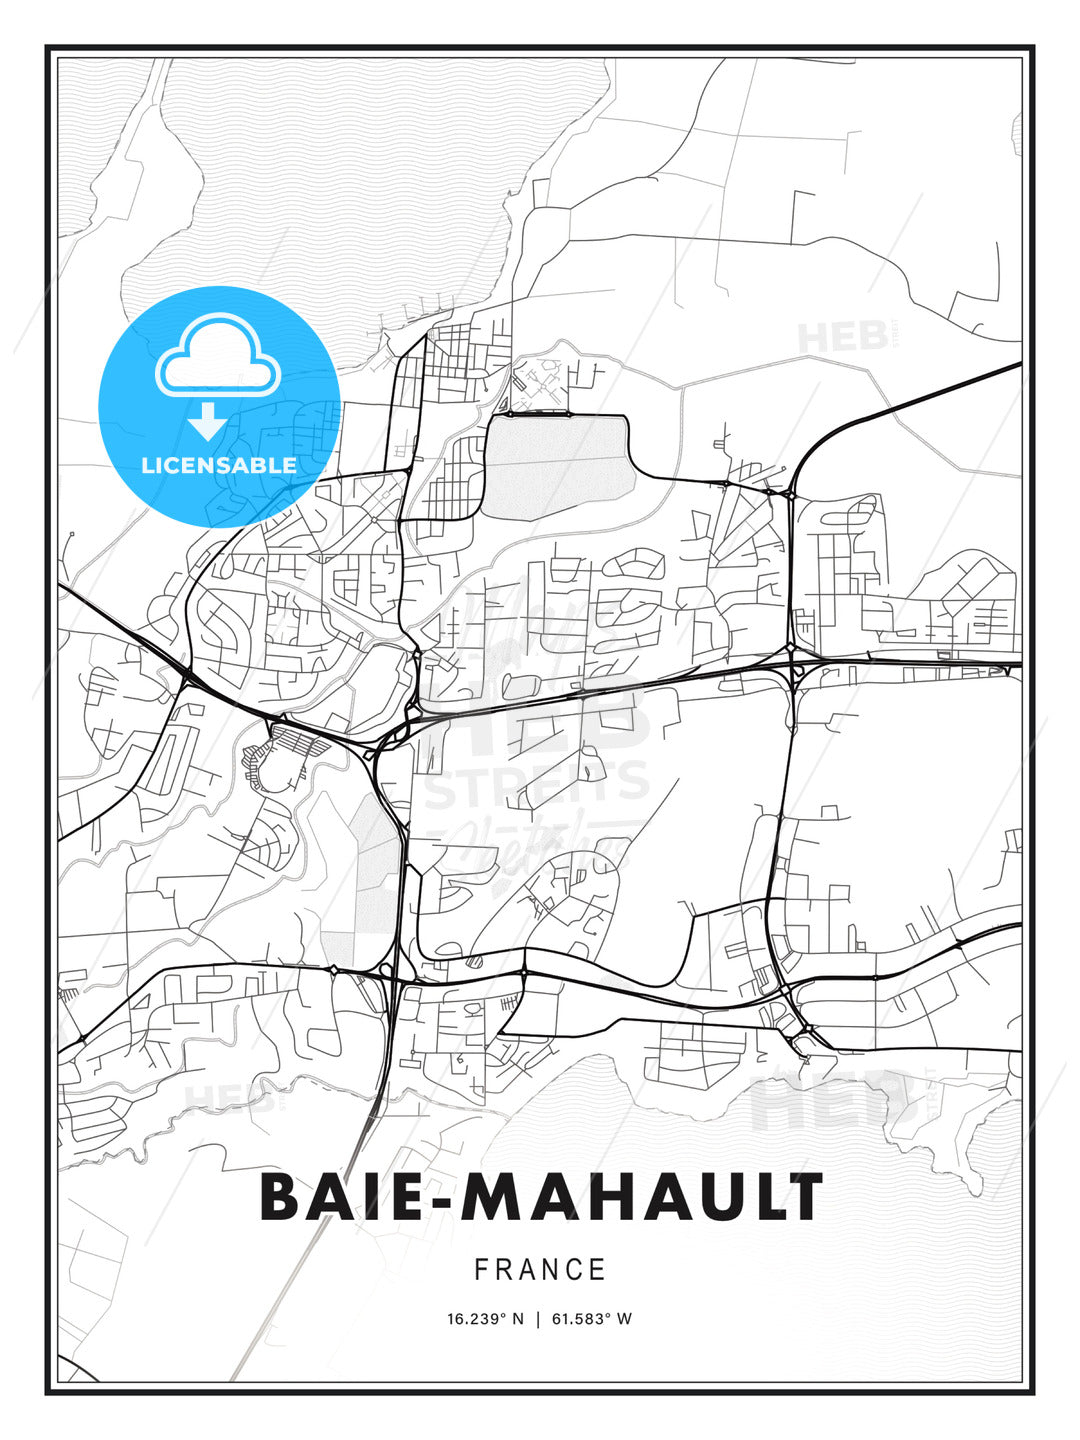 Baie-Mahault, France, Modern Print Template in Various Formats - HEBSTREITS Sketches